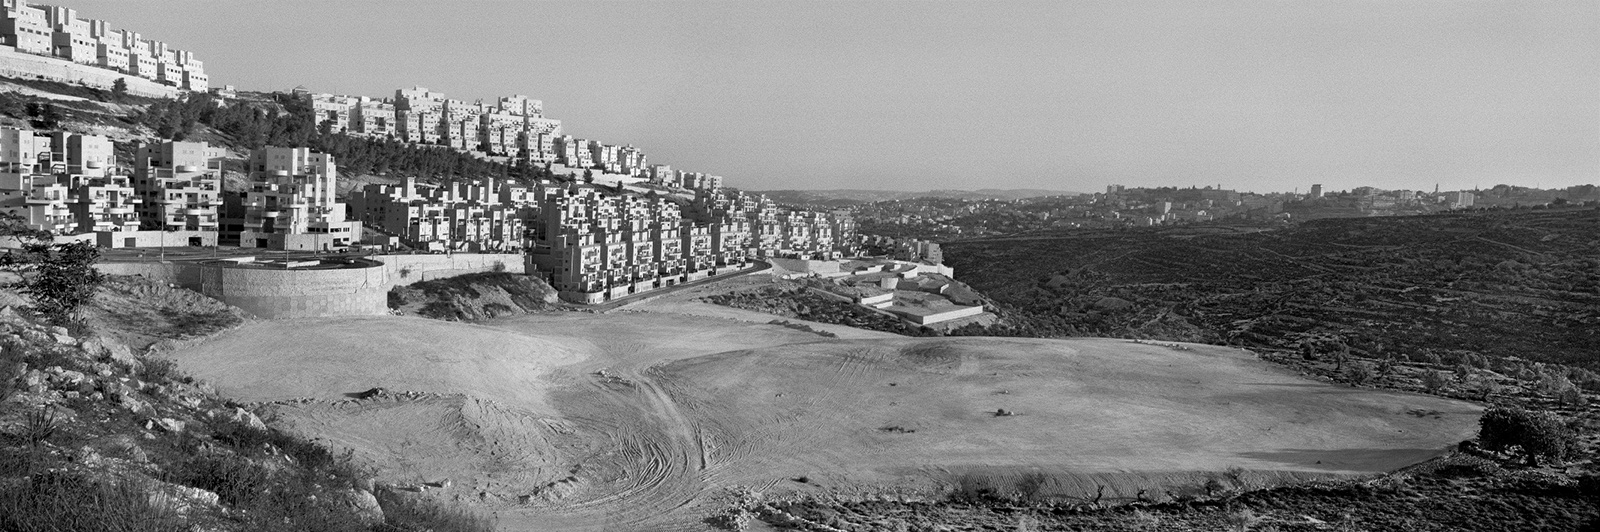 The Har Homa settlement, on a hill opposite Bethlehem, West Bank, 2009; photograph by Josef Koudelka from the exhibition ‘This Place’